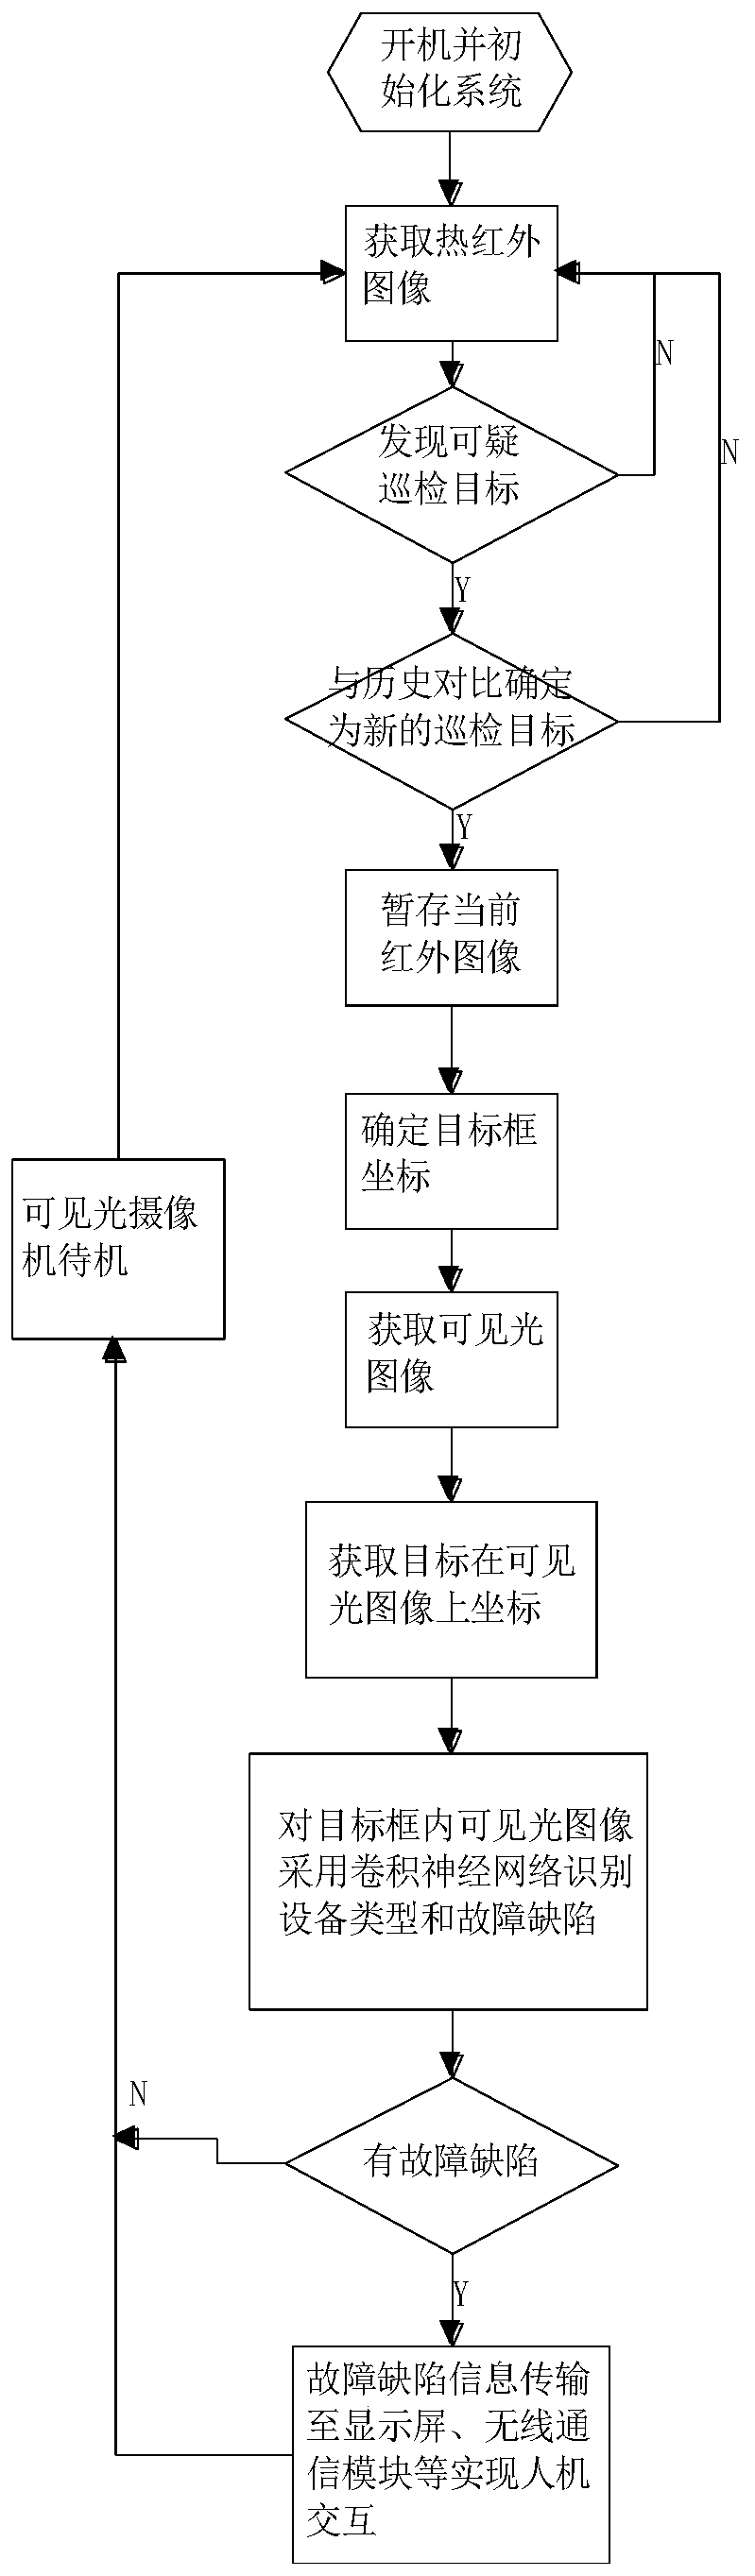 Neural network system and method suitable for portable power inspection